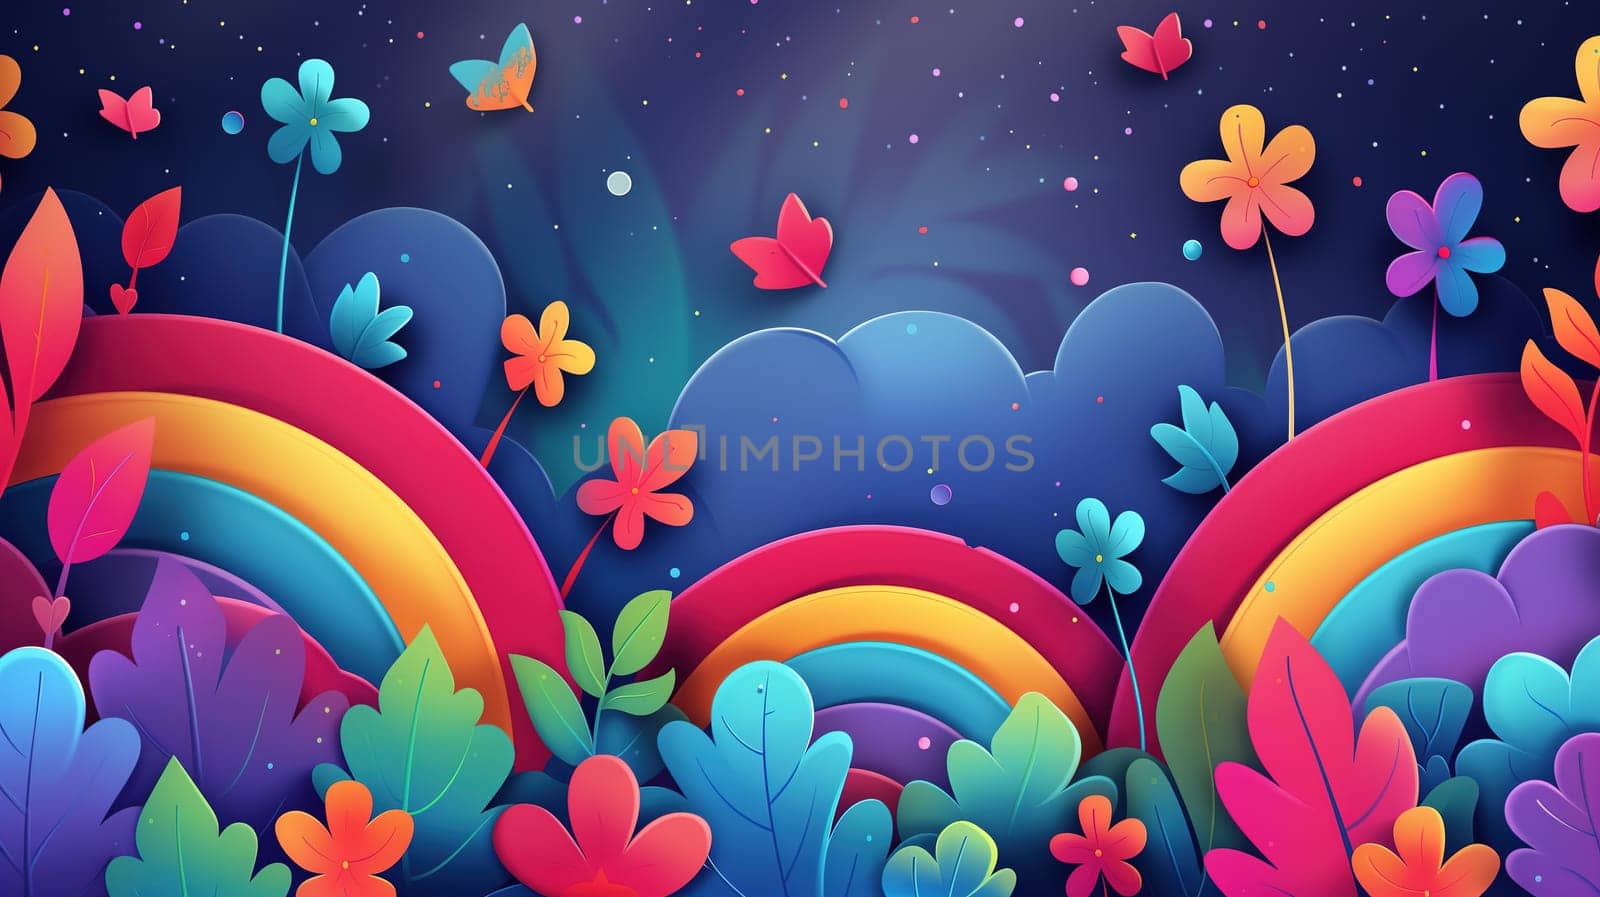 Various vibrant flowers and butterflies fluttering around in a rainbow-colored background, creating a lively and colorful scene.